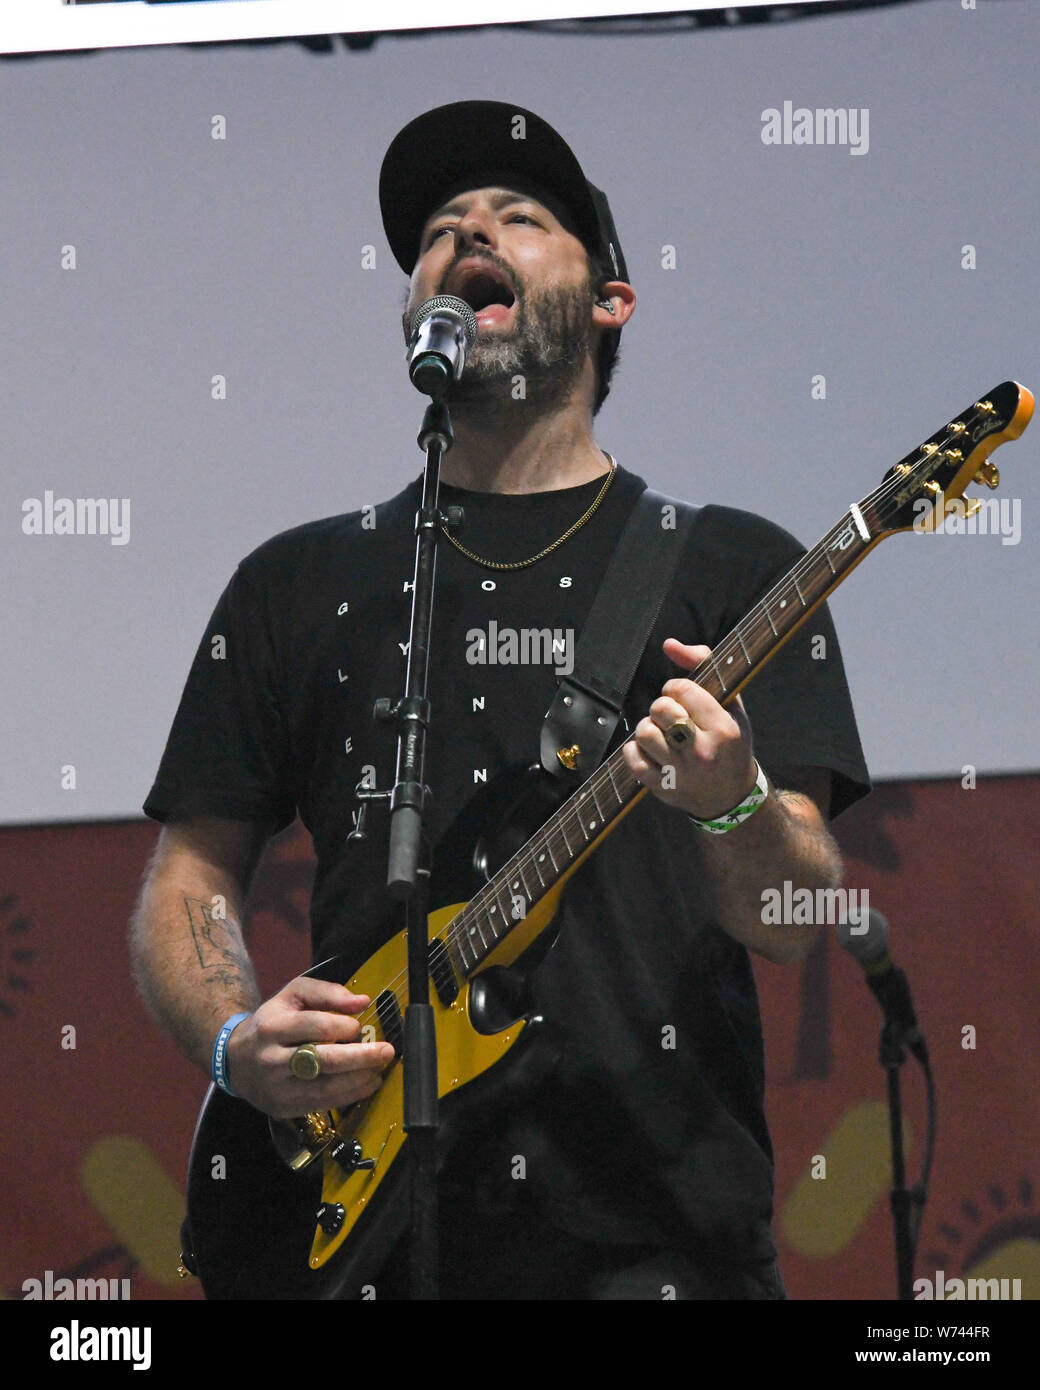 Long Beach, California, USA. 3rd Aug 2019. Josh Carter of the band Phantogram performs at ALT 98.7 Summer Camp at the Queen Mary in Long Beach on August 3, 2019. Credit: The Photo Access/Alamy Live News Stock Photo